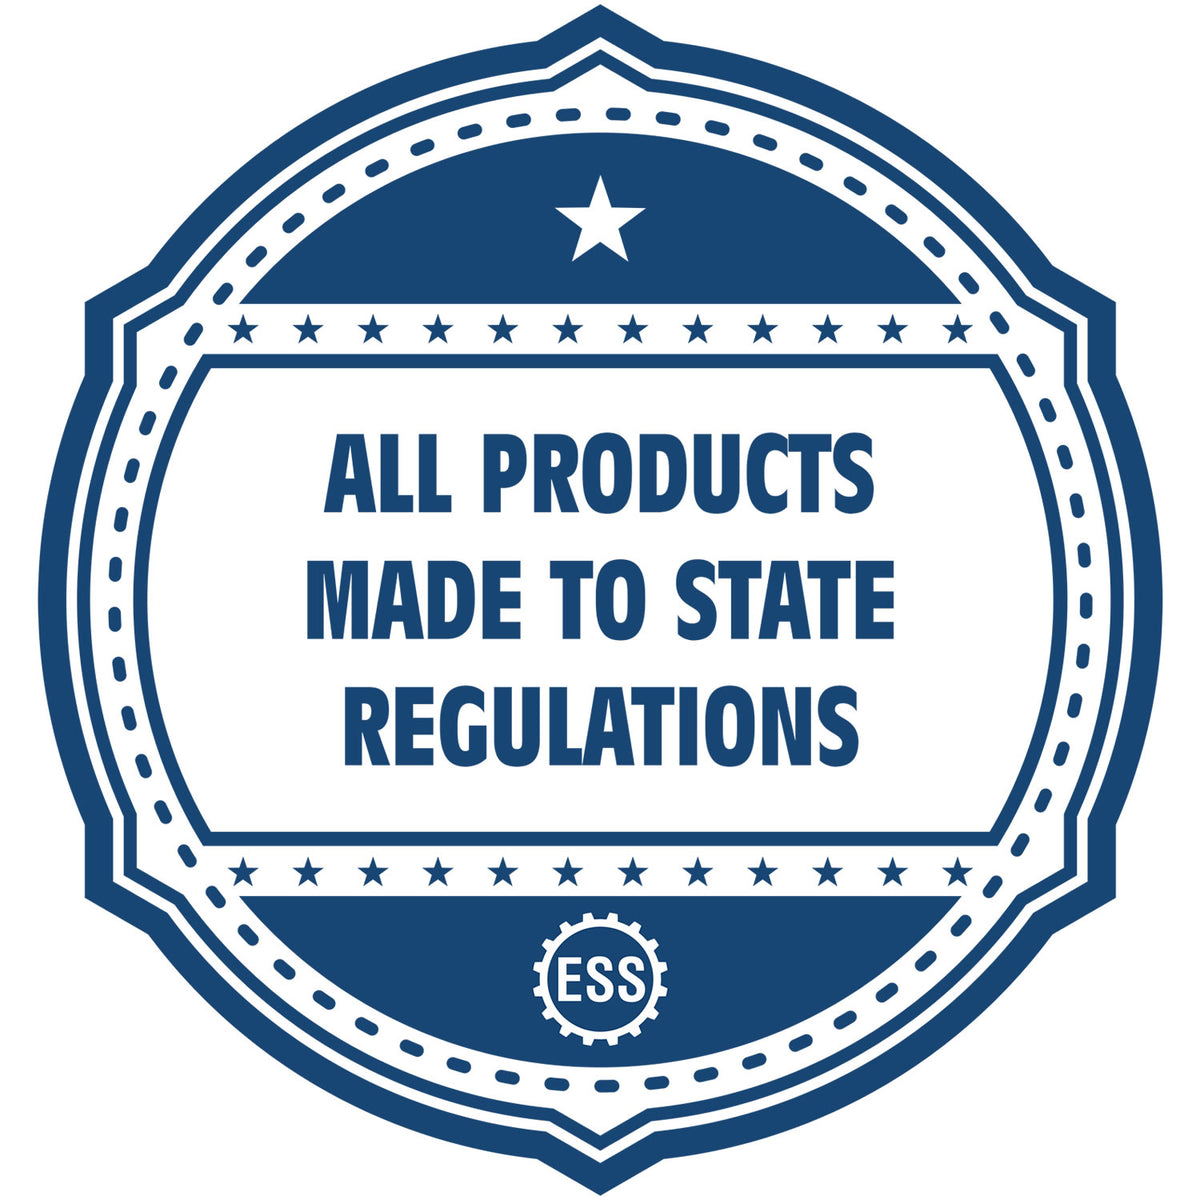 An icon or badge element for the Heavy Duty Cast Iron Vermont Engineer Seal Embosser showing that this product is made in compliance with state regulations.